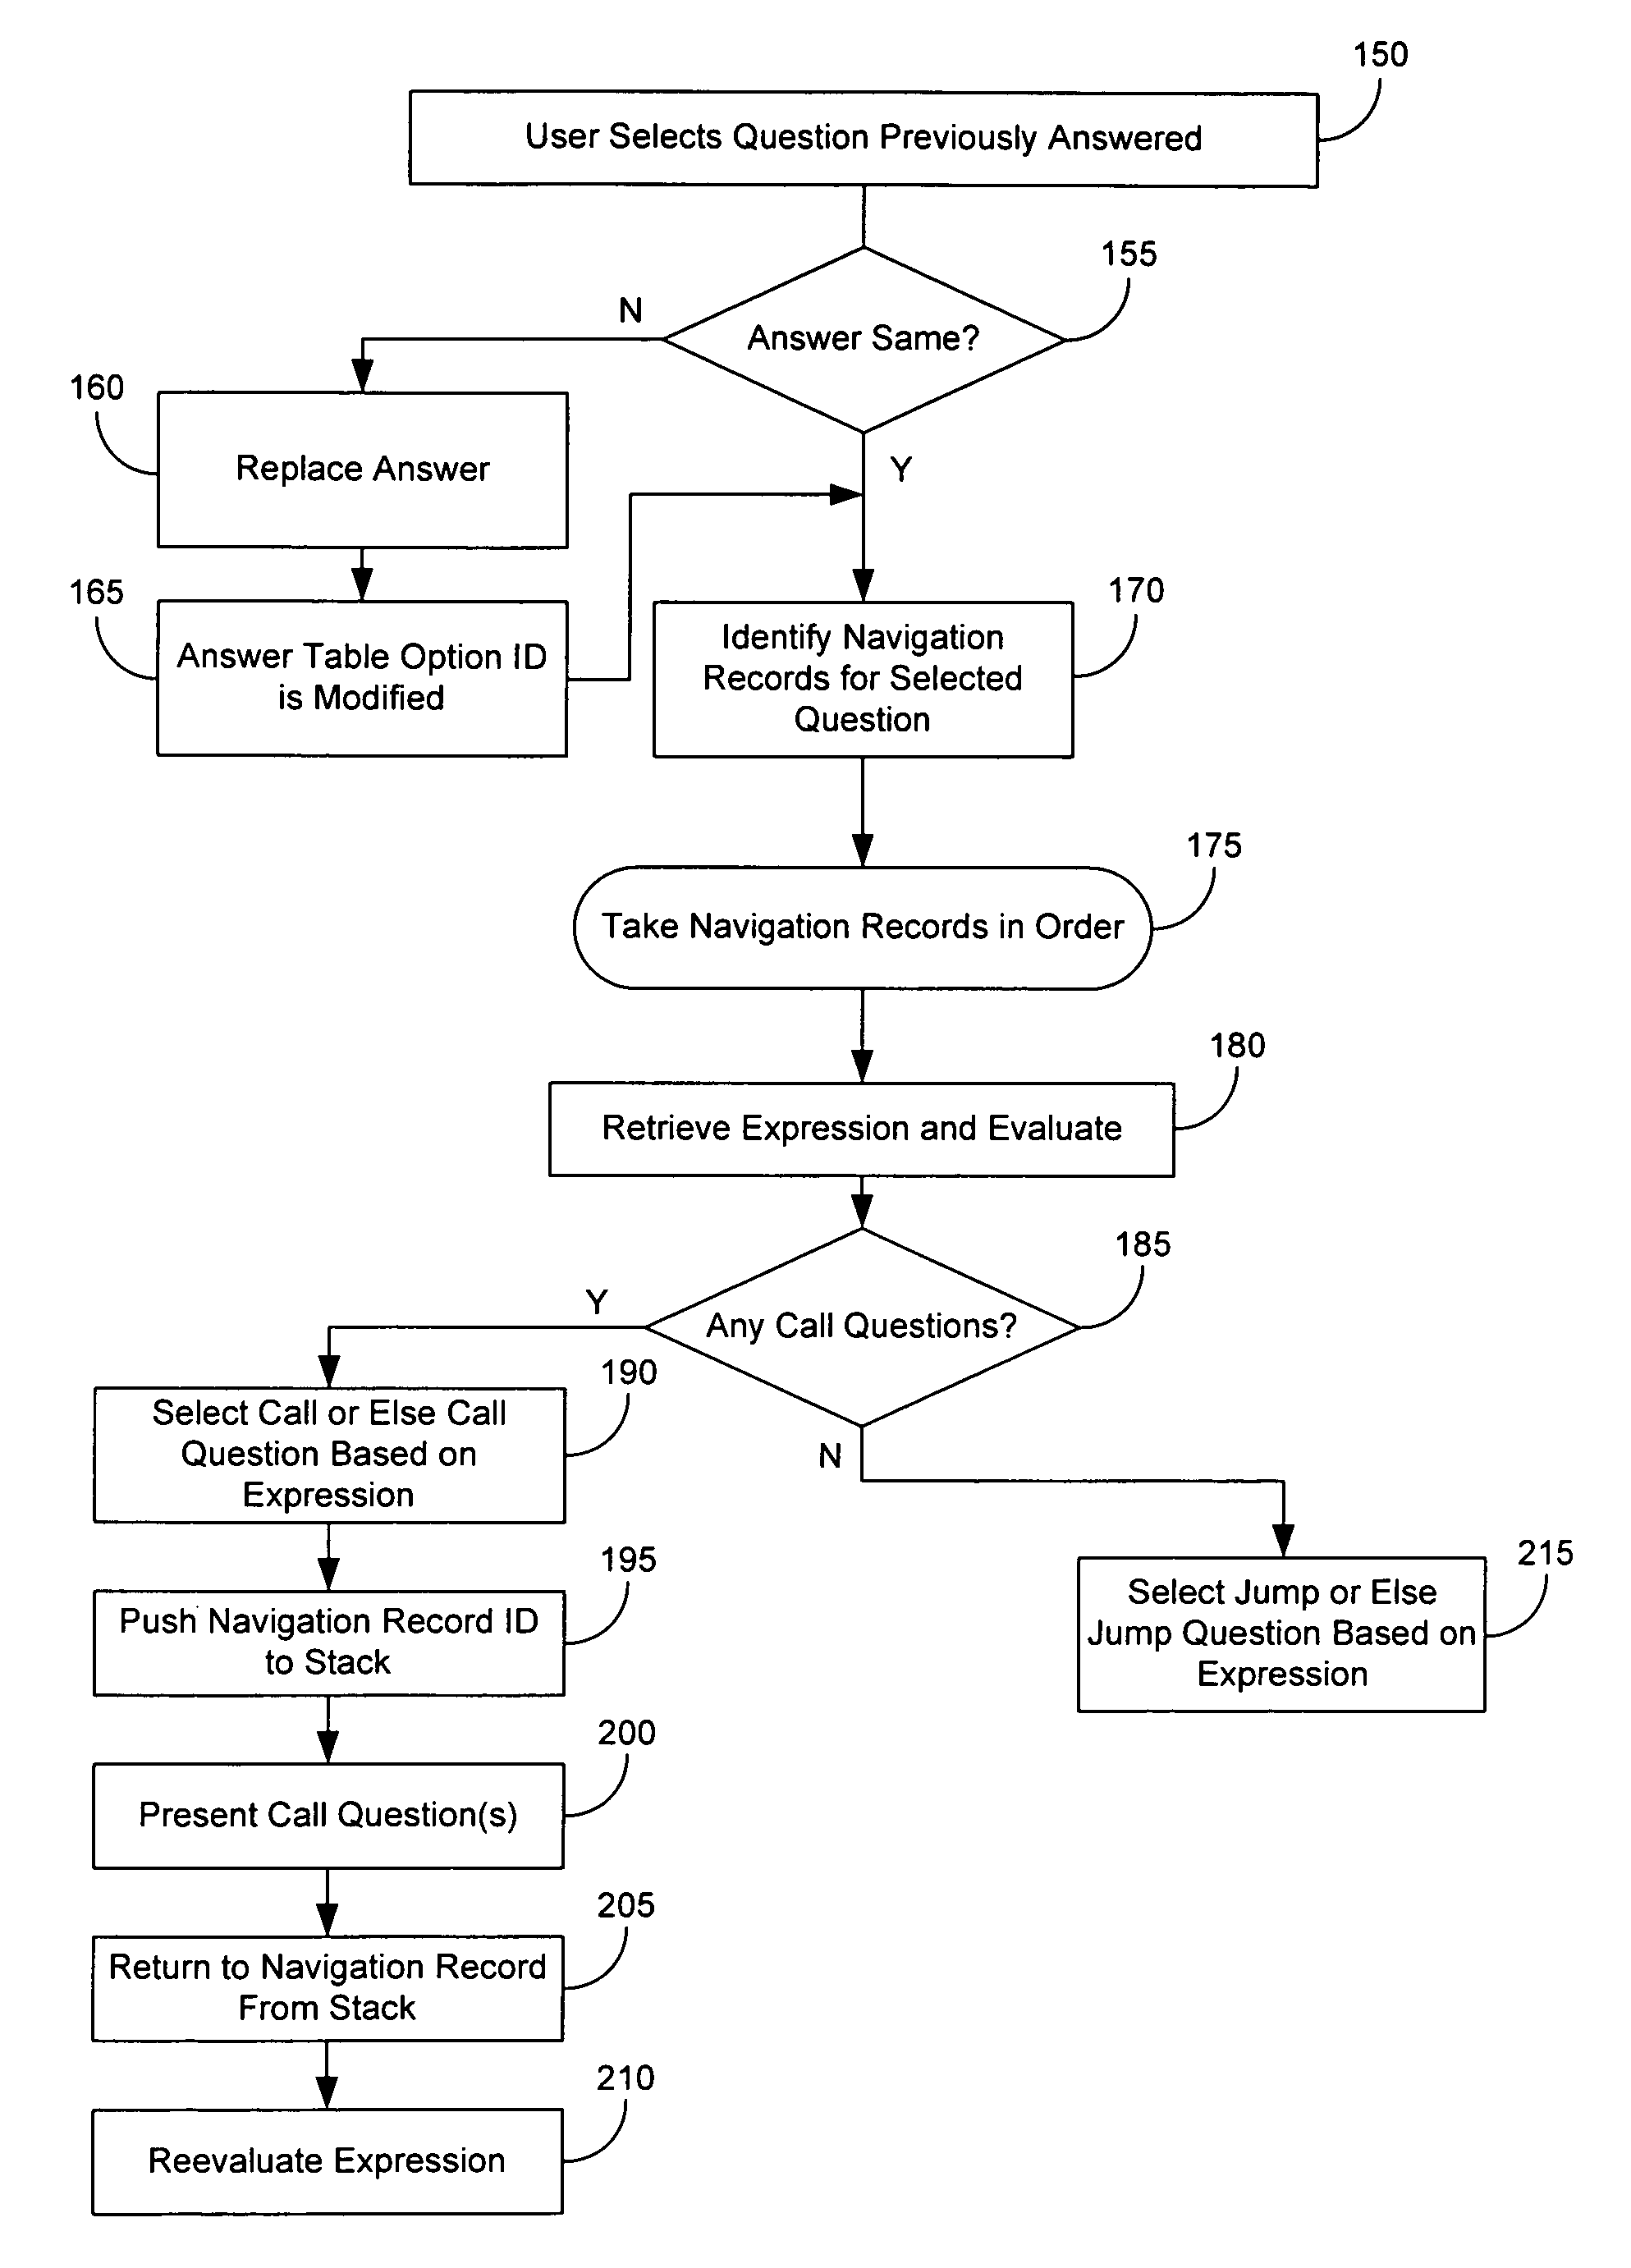 Systems and methods for generating configuration metrics in a storage network